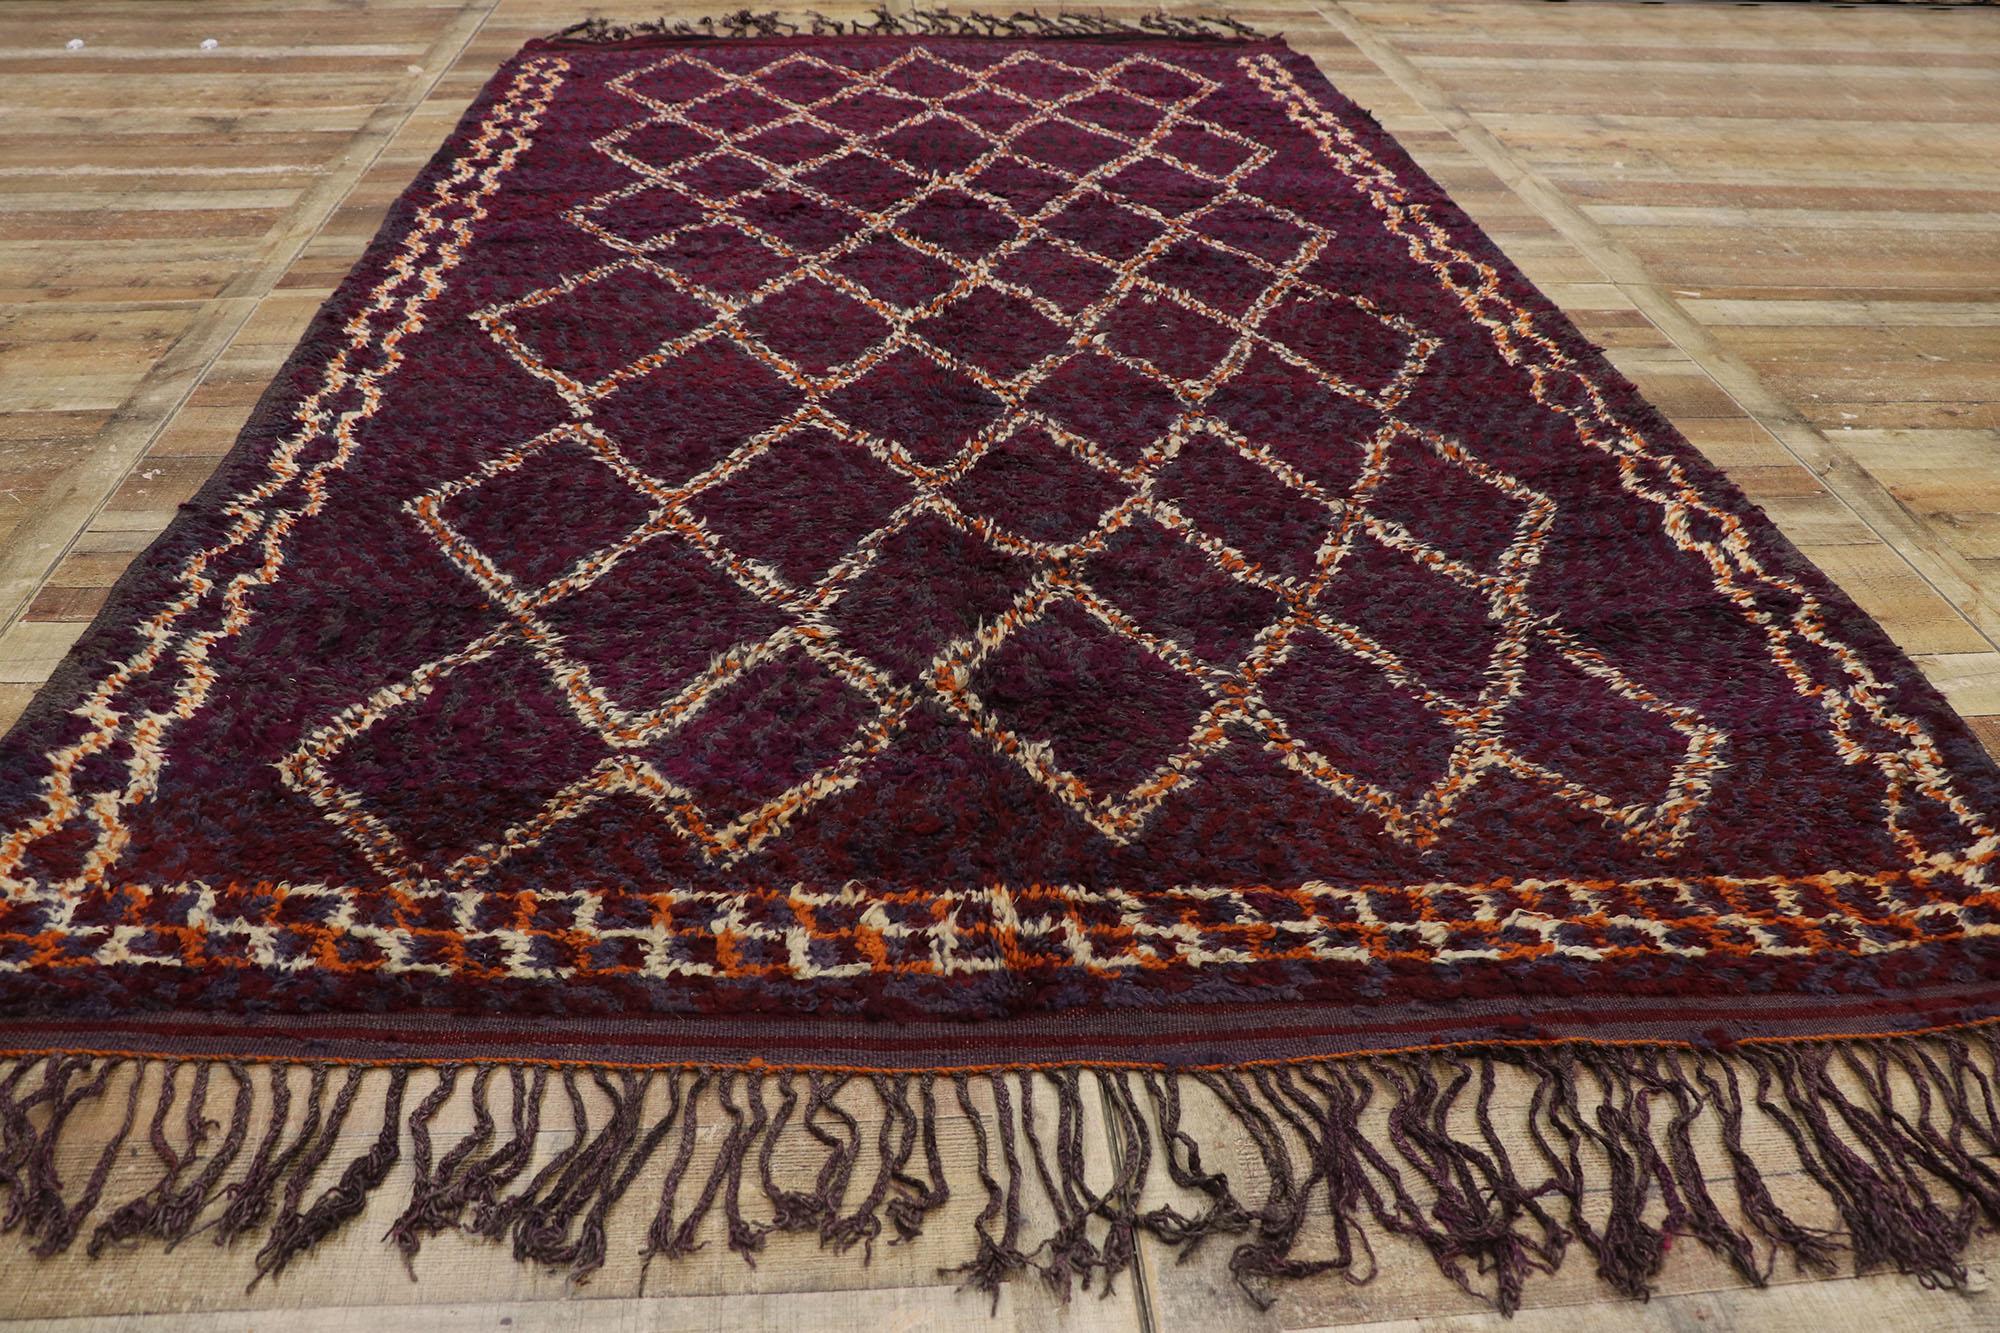 Vintage Berber Beni M'guild Moroccan Rug with Bohemian Style For Sale 1